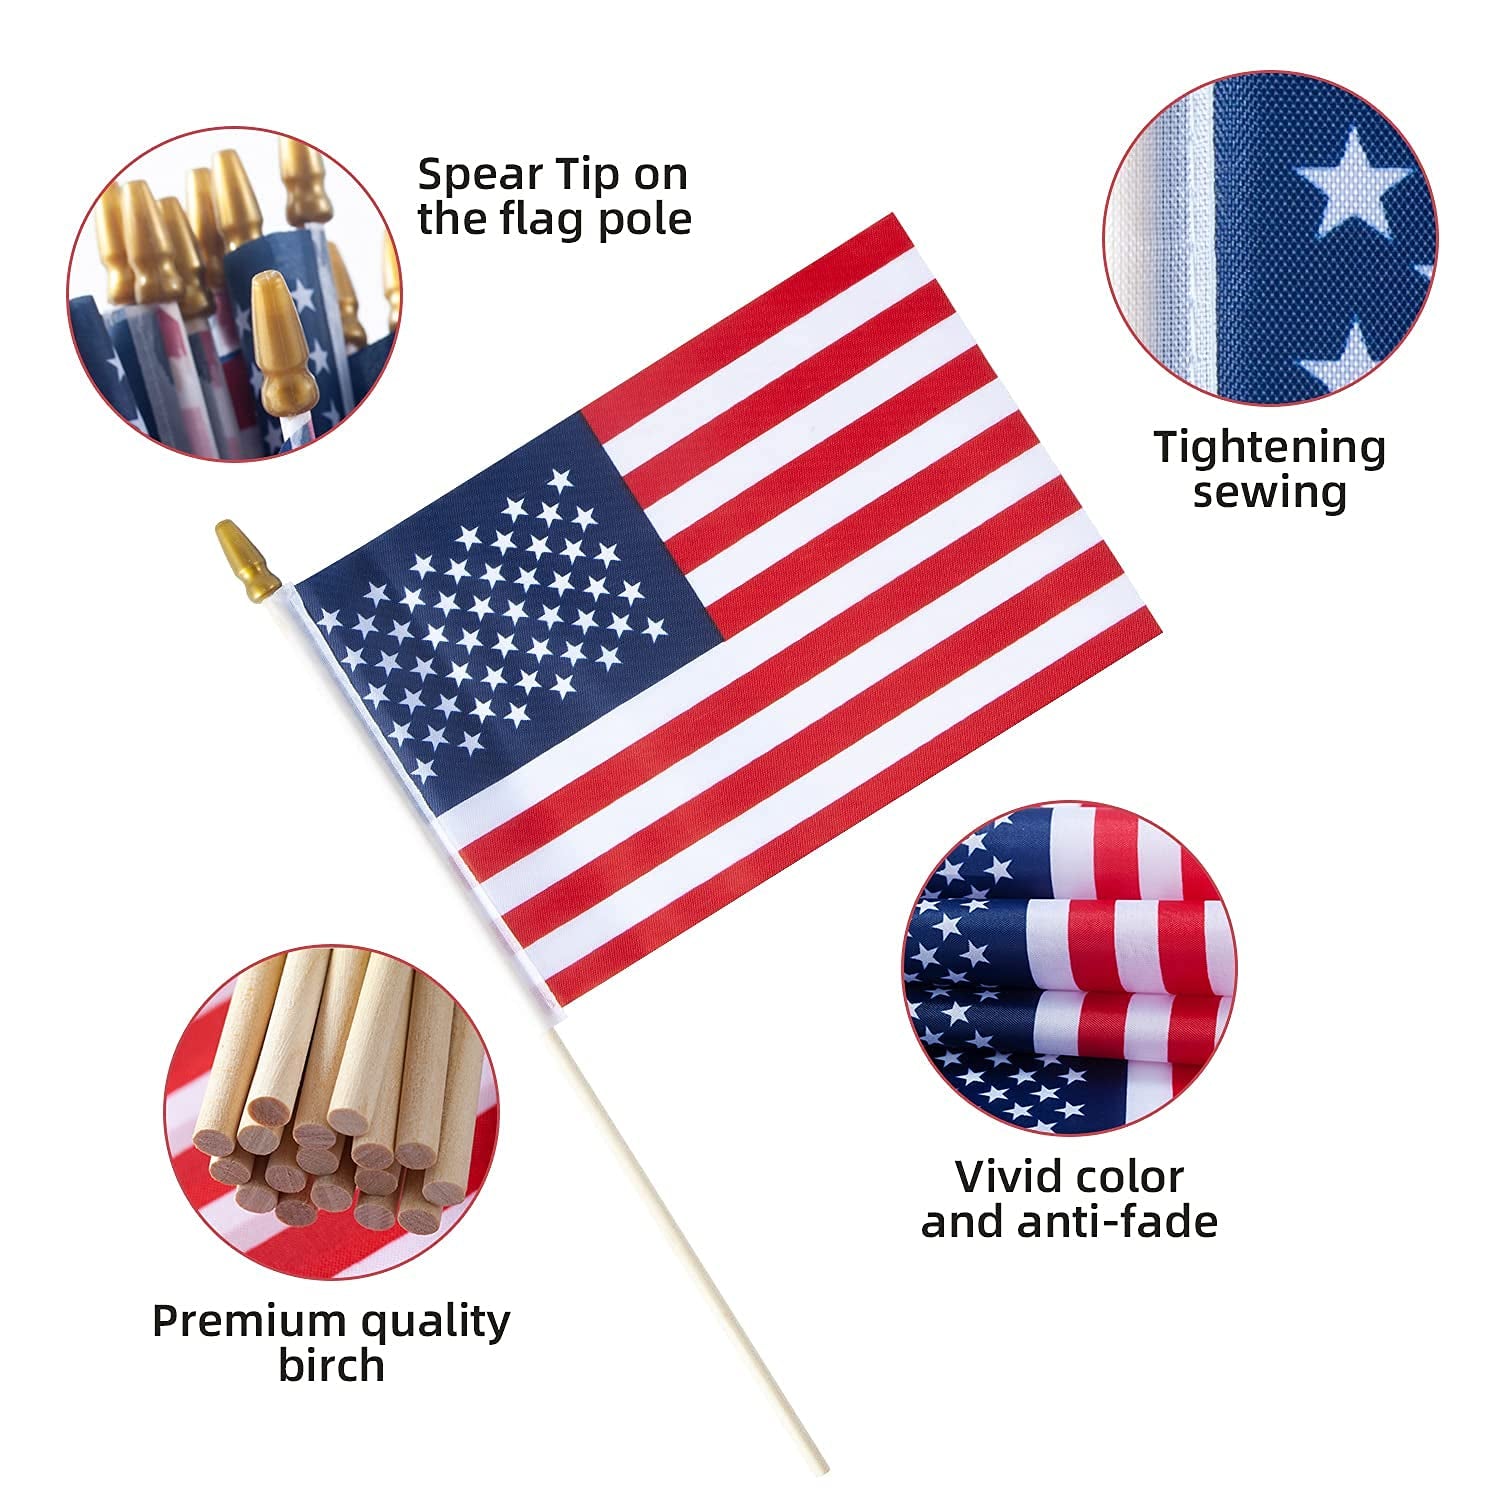 phemera, Small American 4X6 Inch Flags-50 Pack, Handheld American Flag/Us Flag, for 4Th of July Decorations, Patriotic Decorations, Party Decorations and Parades， with Kid Safe Golden Spear Top